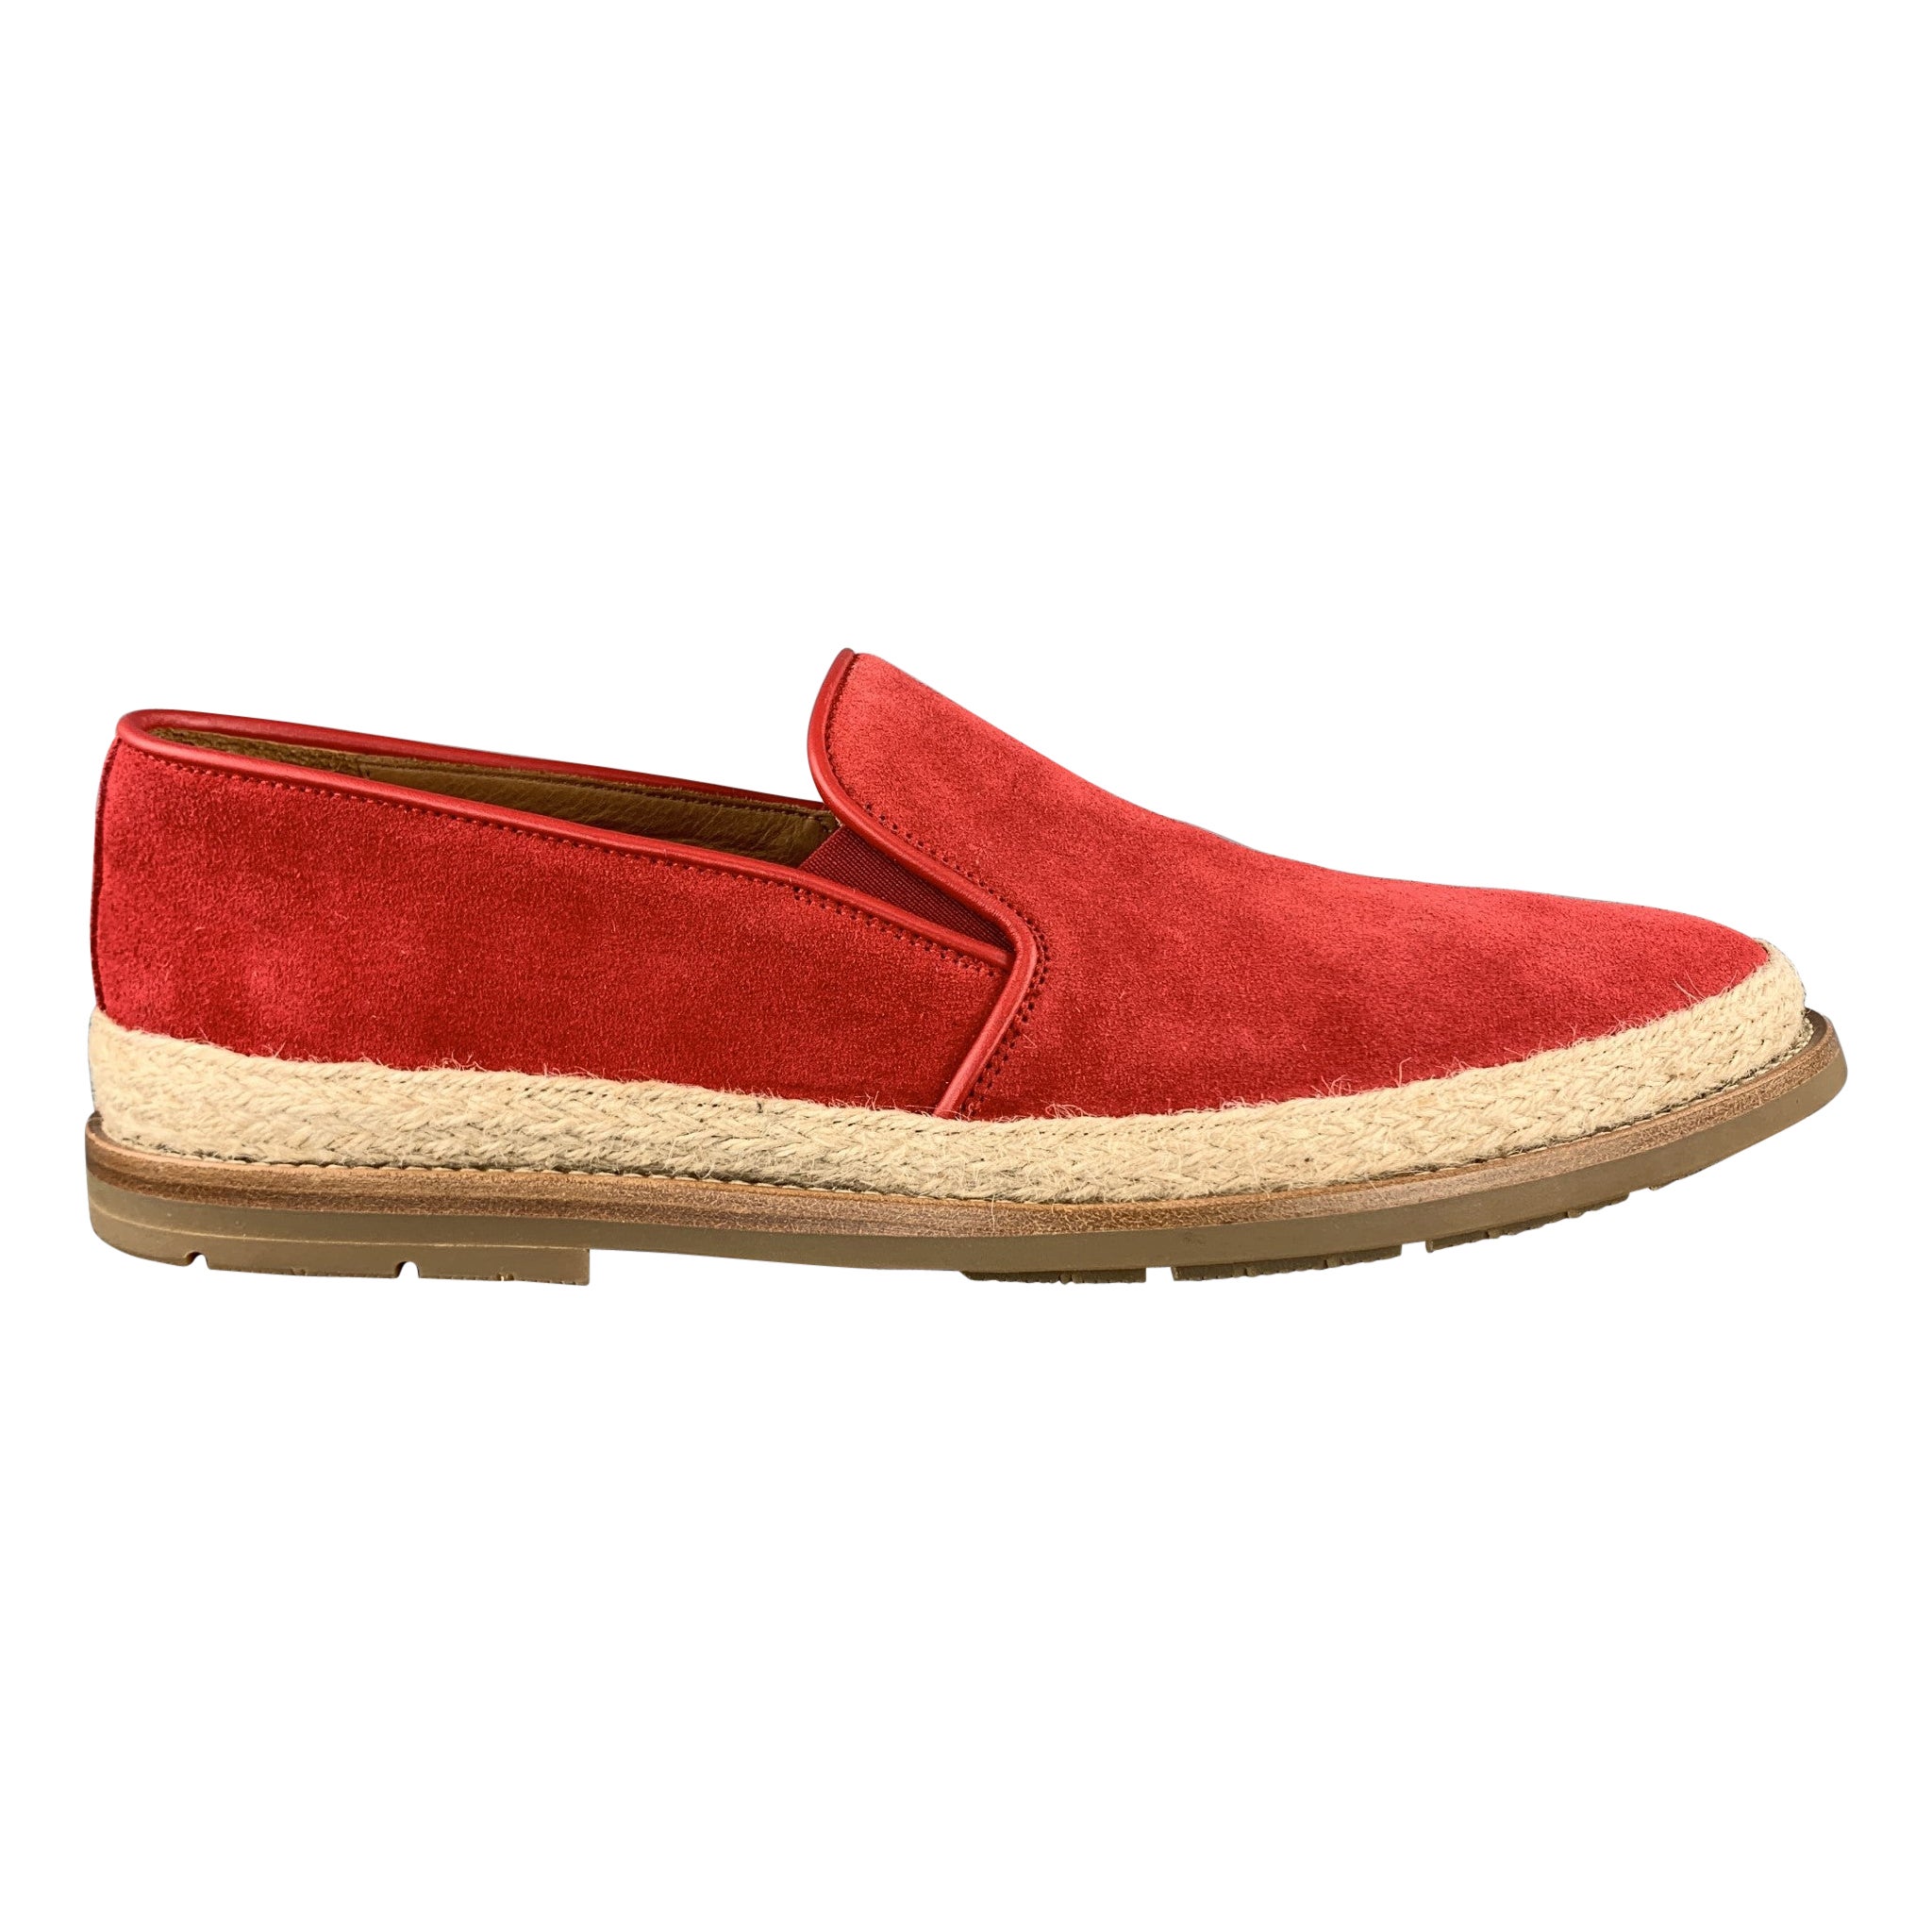 AQUATALIA Size 11 Red Suede Braided Trim Rubber Sole Loafers